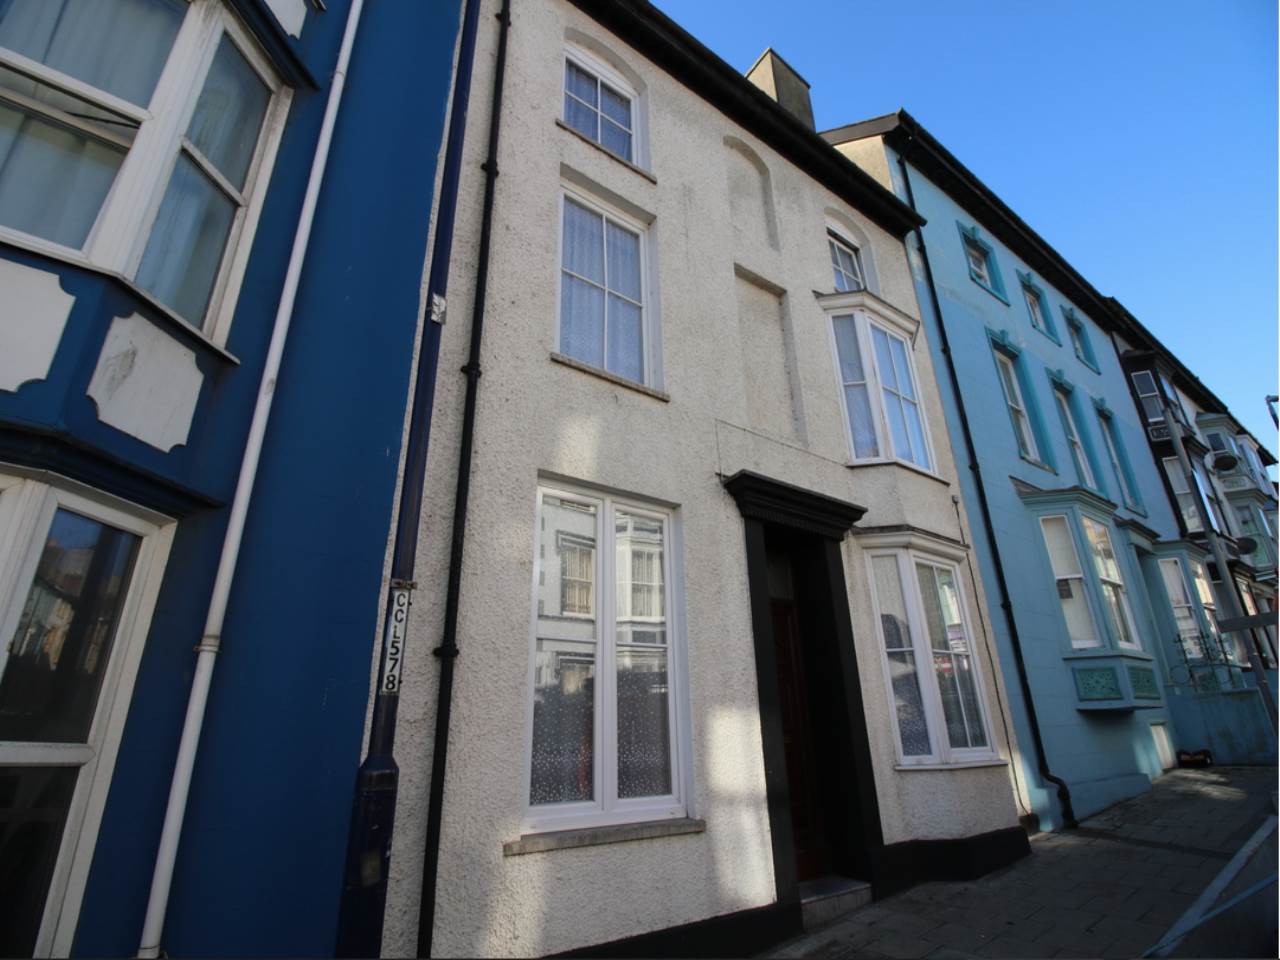 9 bed house for sale in Bridge Street, Aberystwyth  - Property Image 1